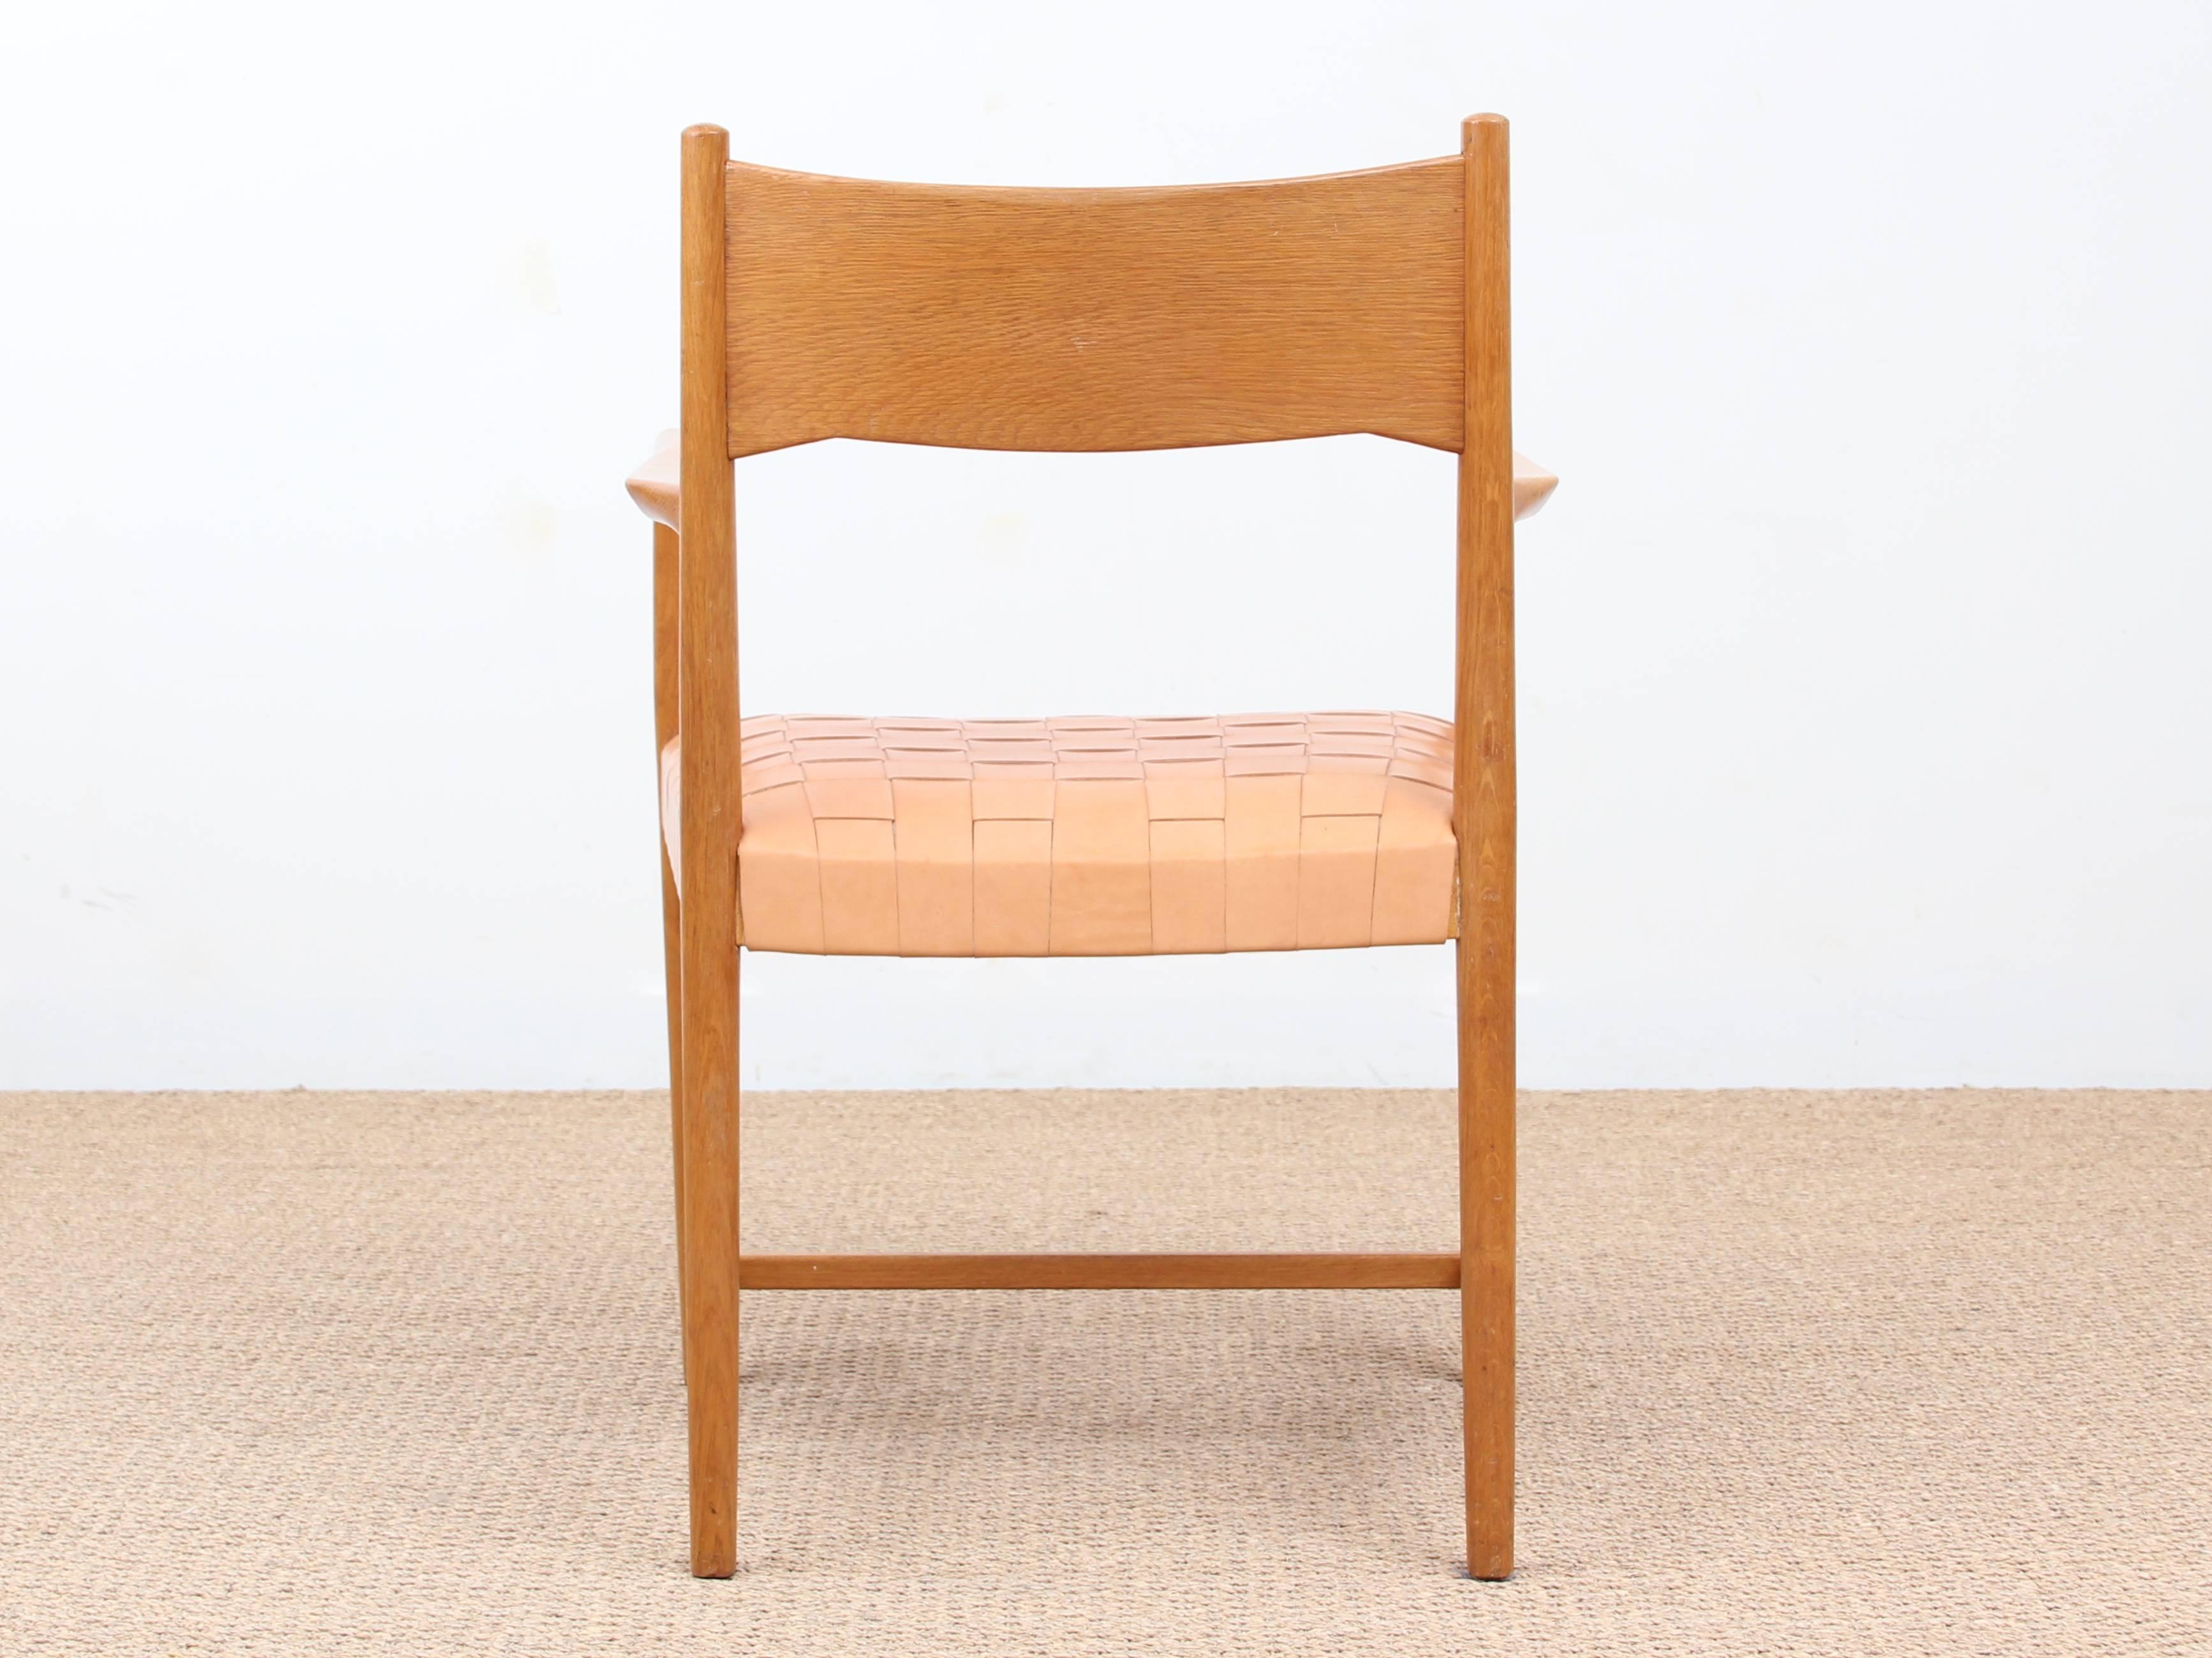 Mid-Century Modern scandinavian armchair model Århus Cityhall by Hans Wegner designed, circa 1940. Solid oak frame, seat reupholstered as original with natural leather straps.

The armchair was part of the furniture of the Århus Cityhall in